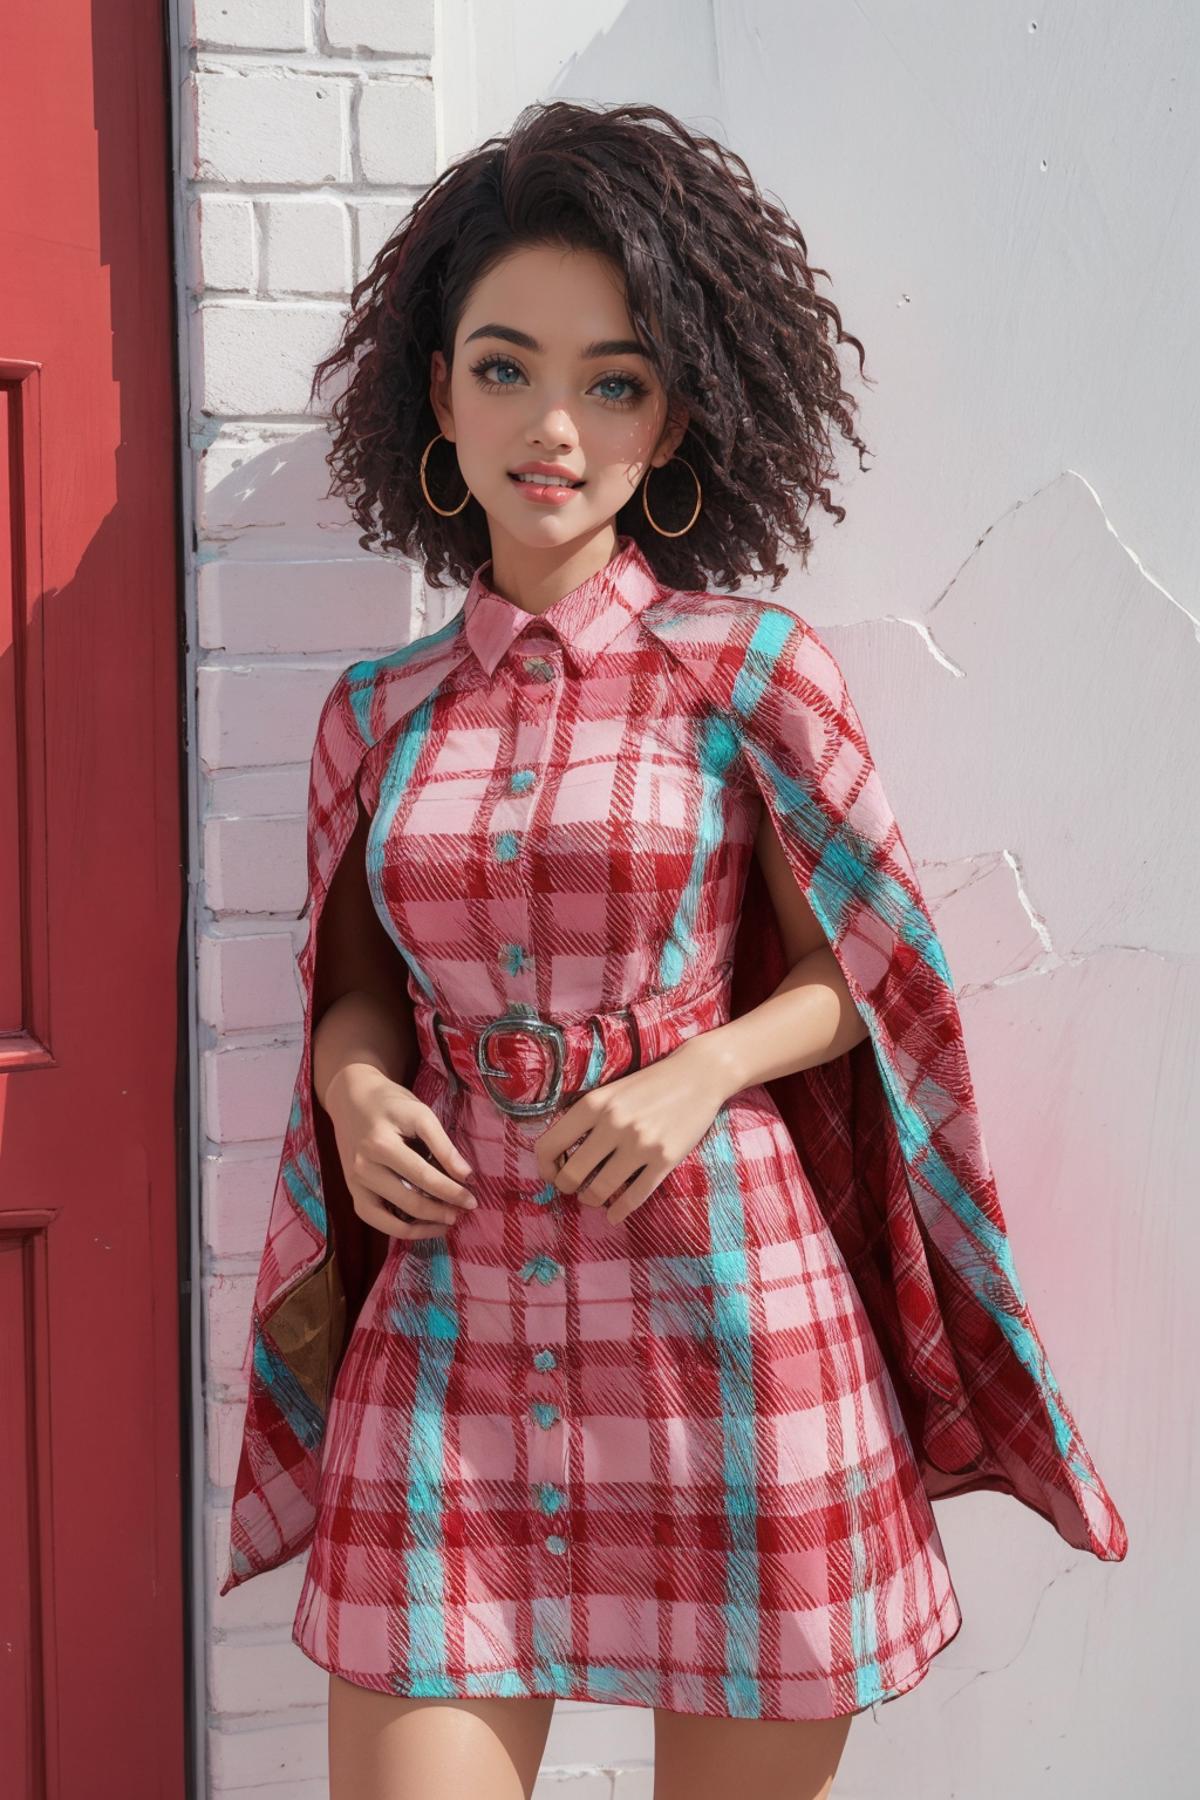 Plaid Dress with attached Cape image by headupdef